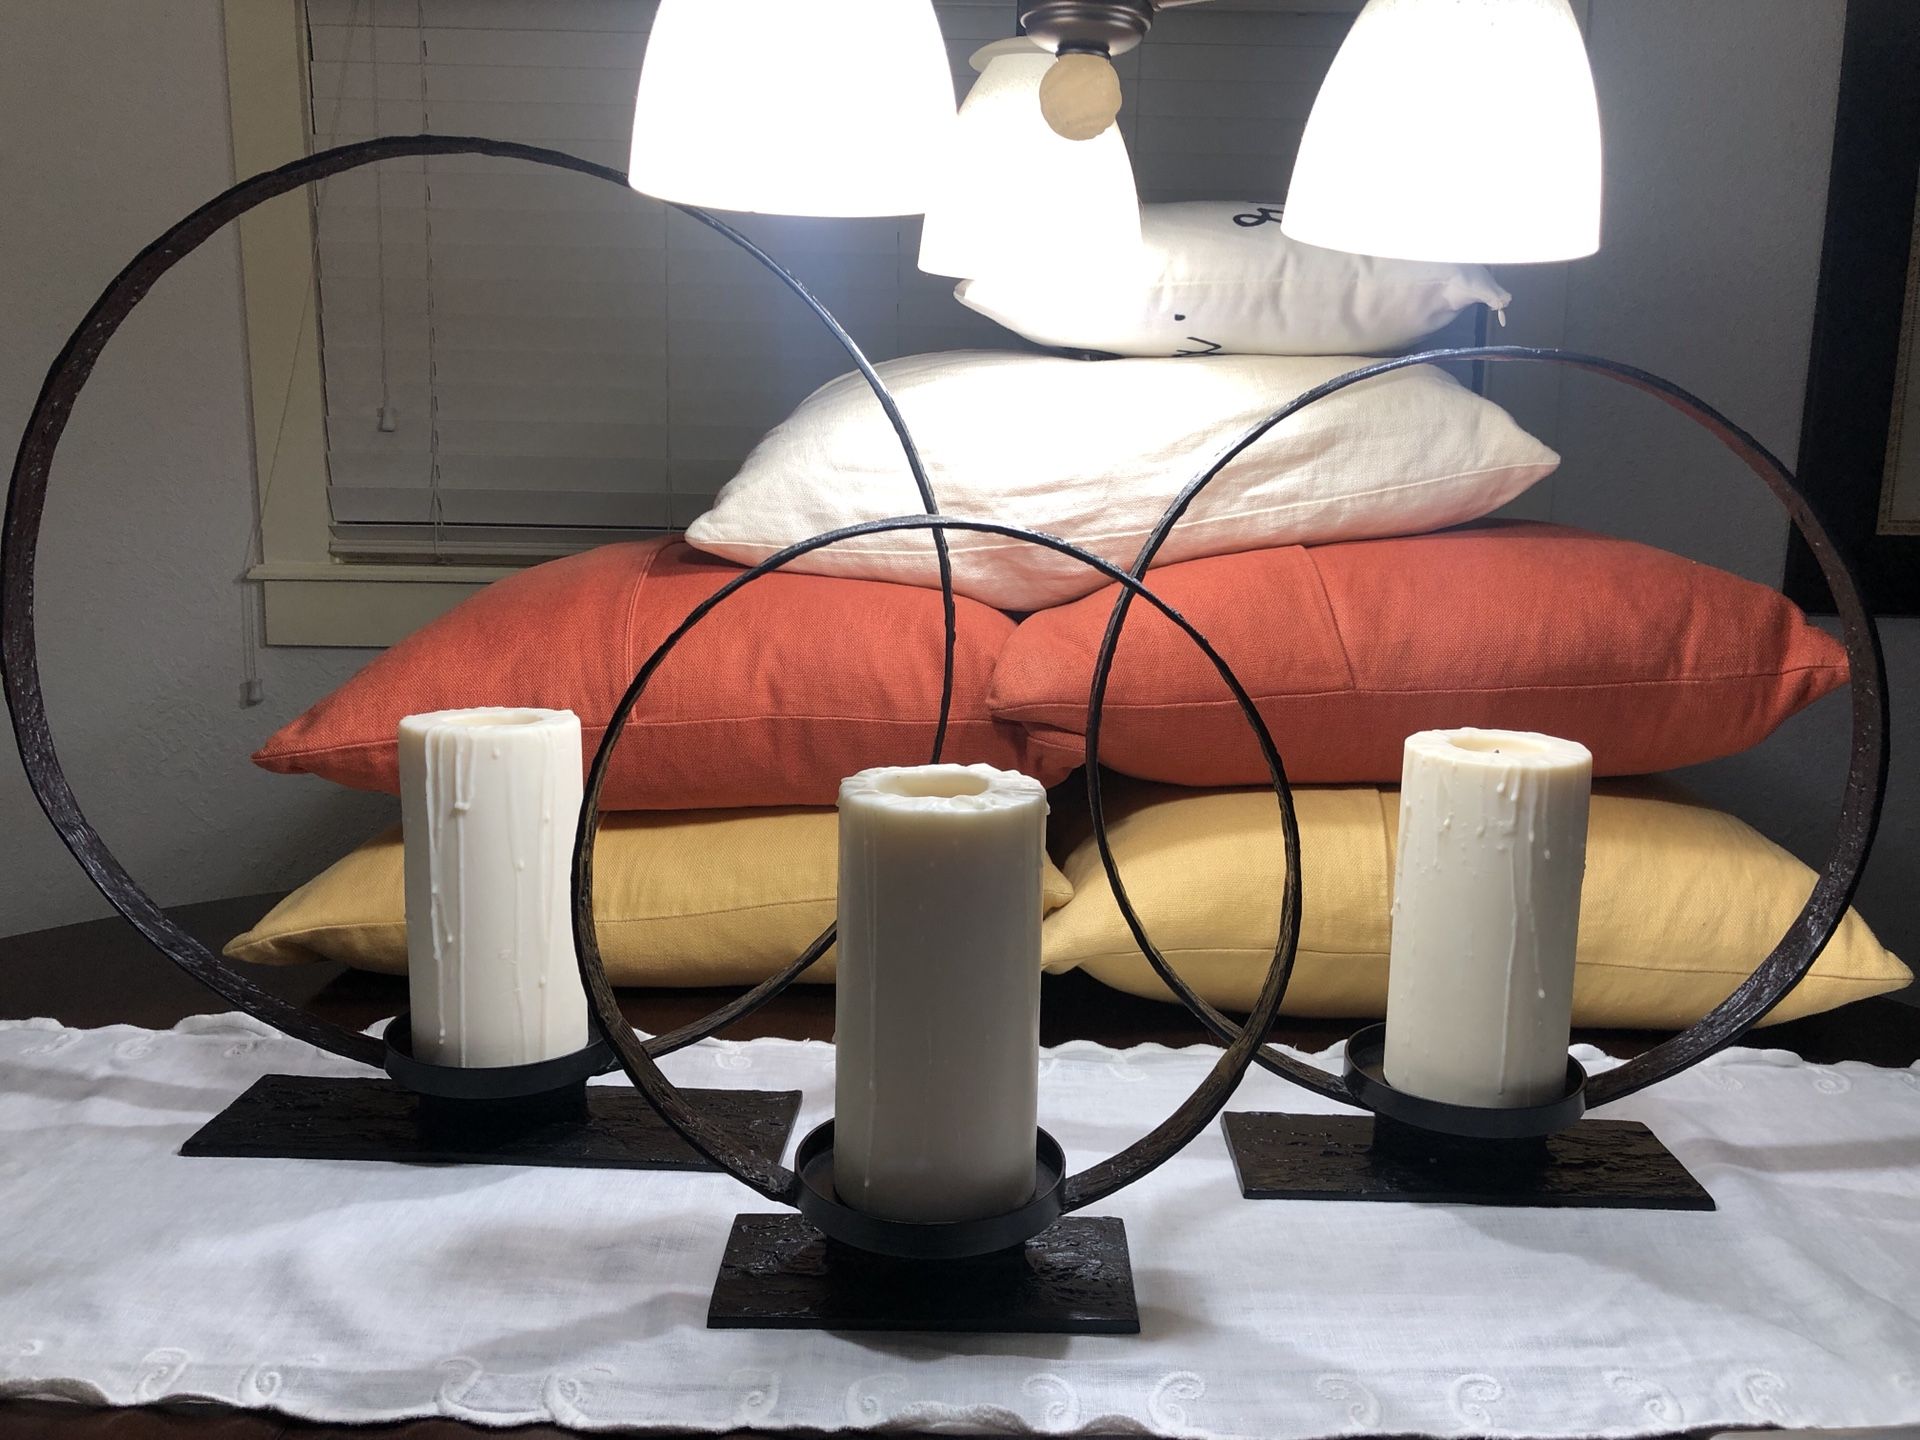 Elegant Candle Holders- set of 3 (candles included)